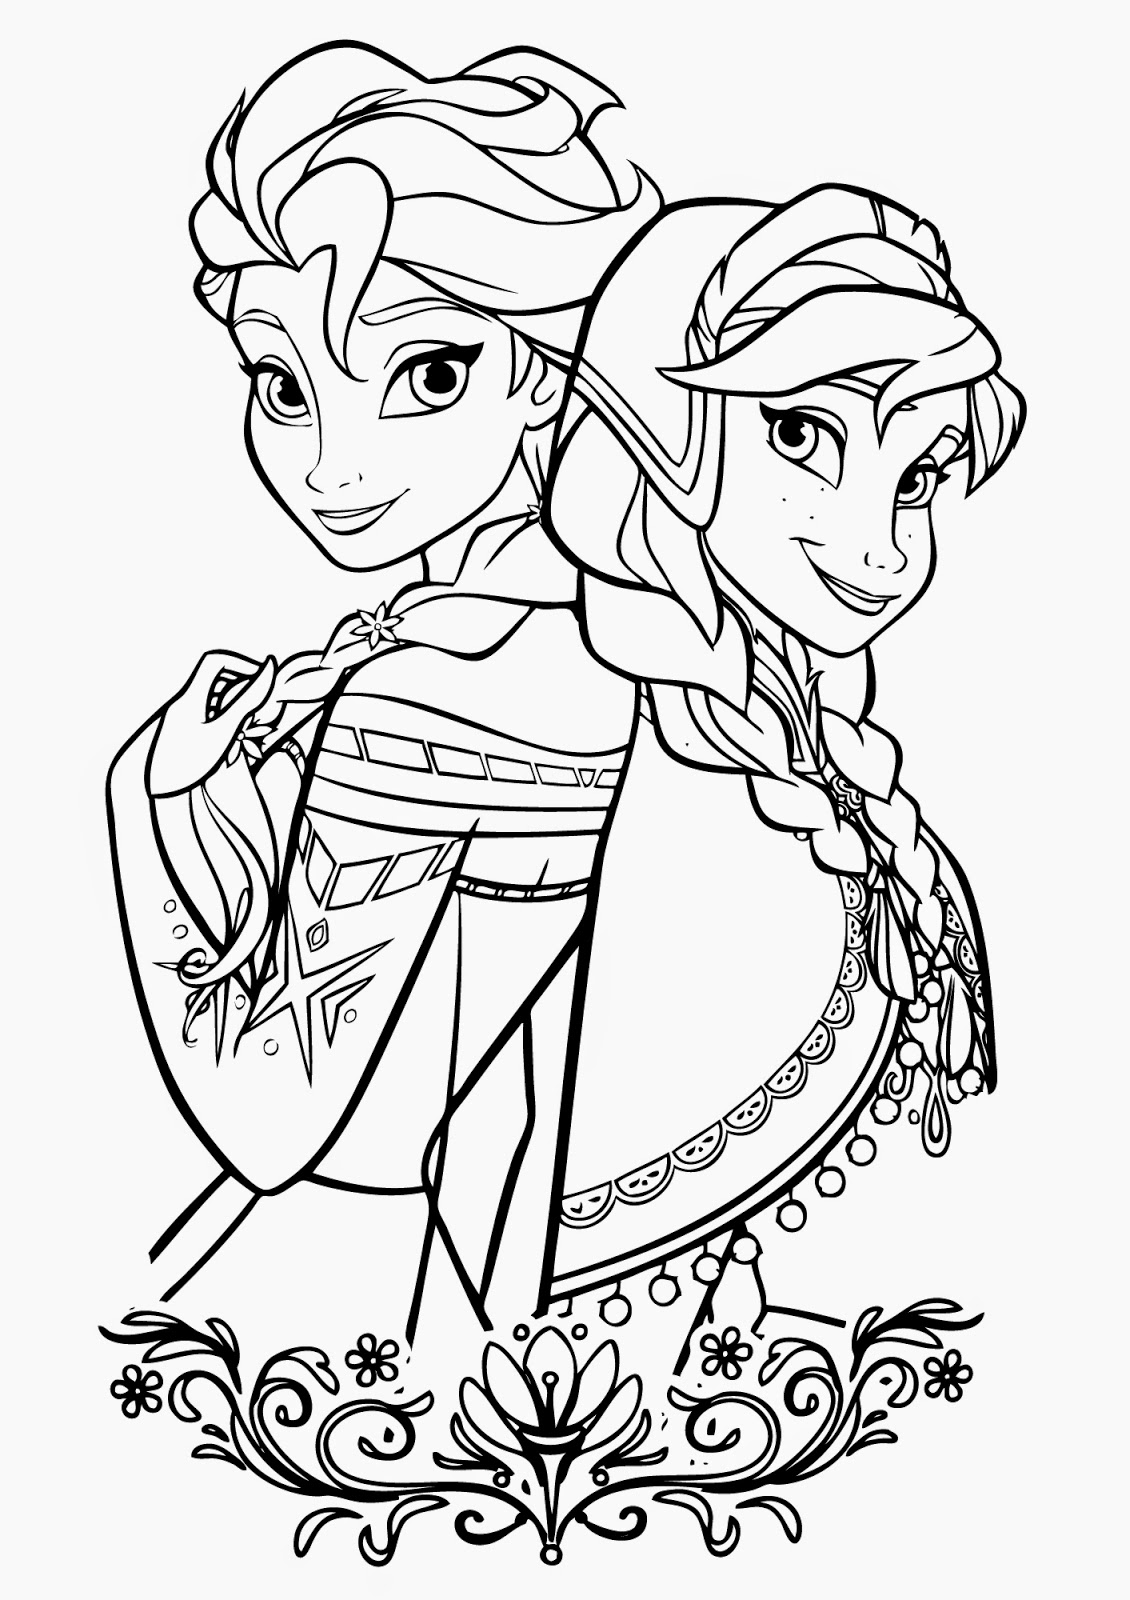 Coloring Pages Disney For Adults